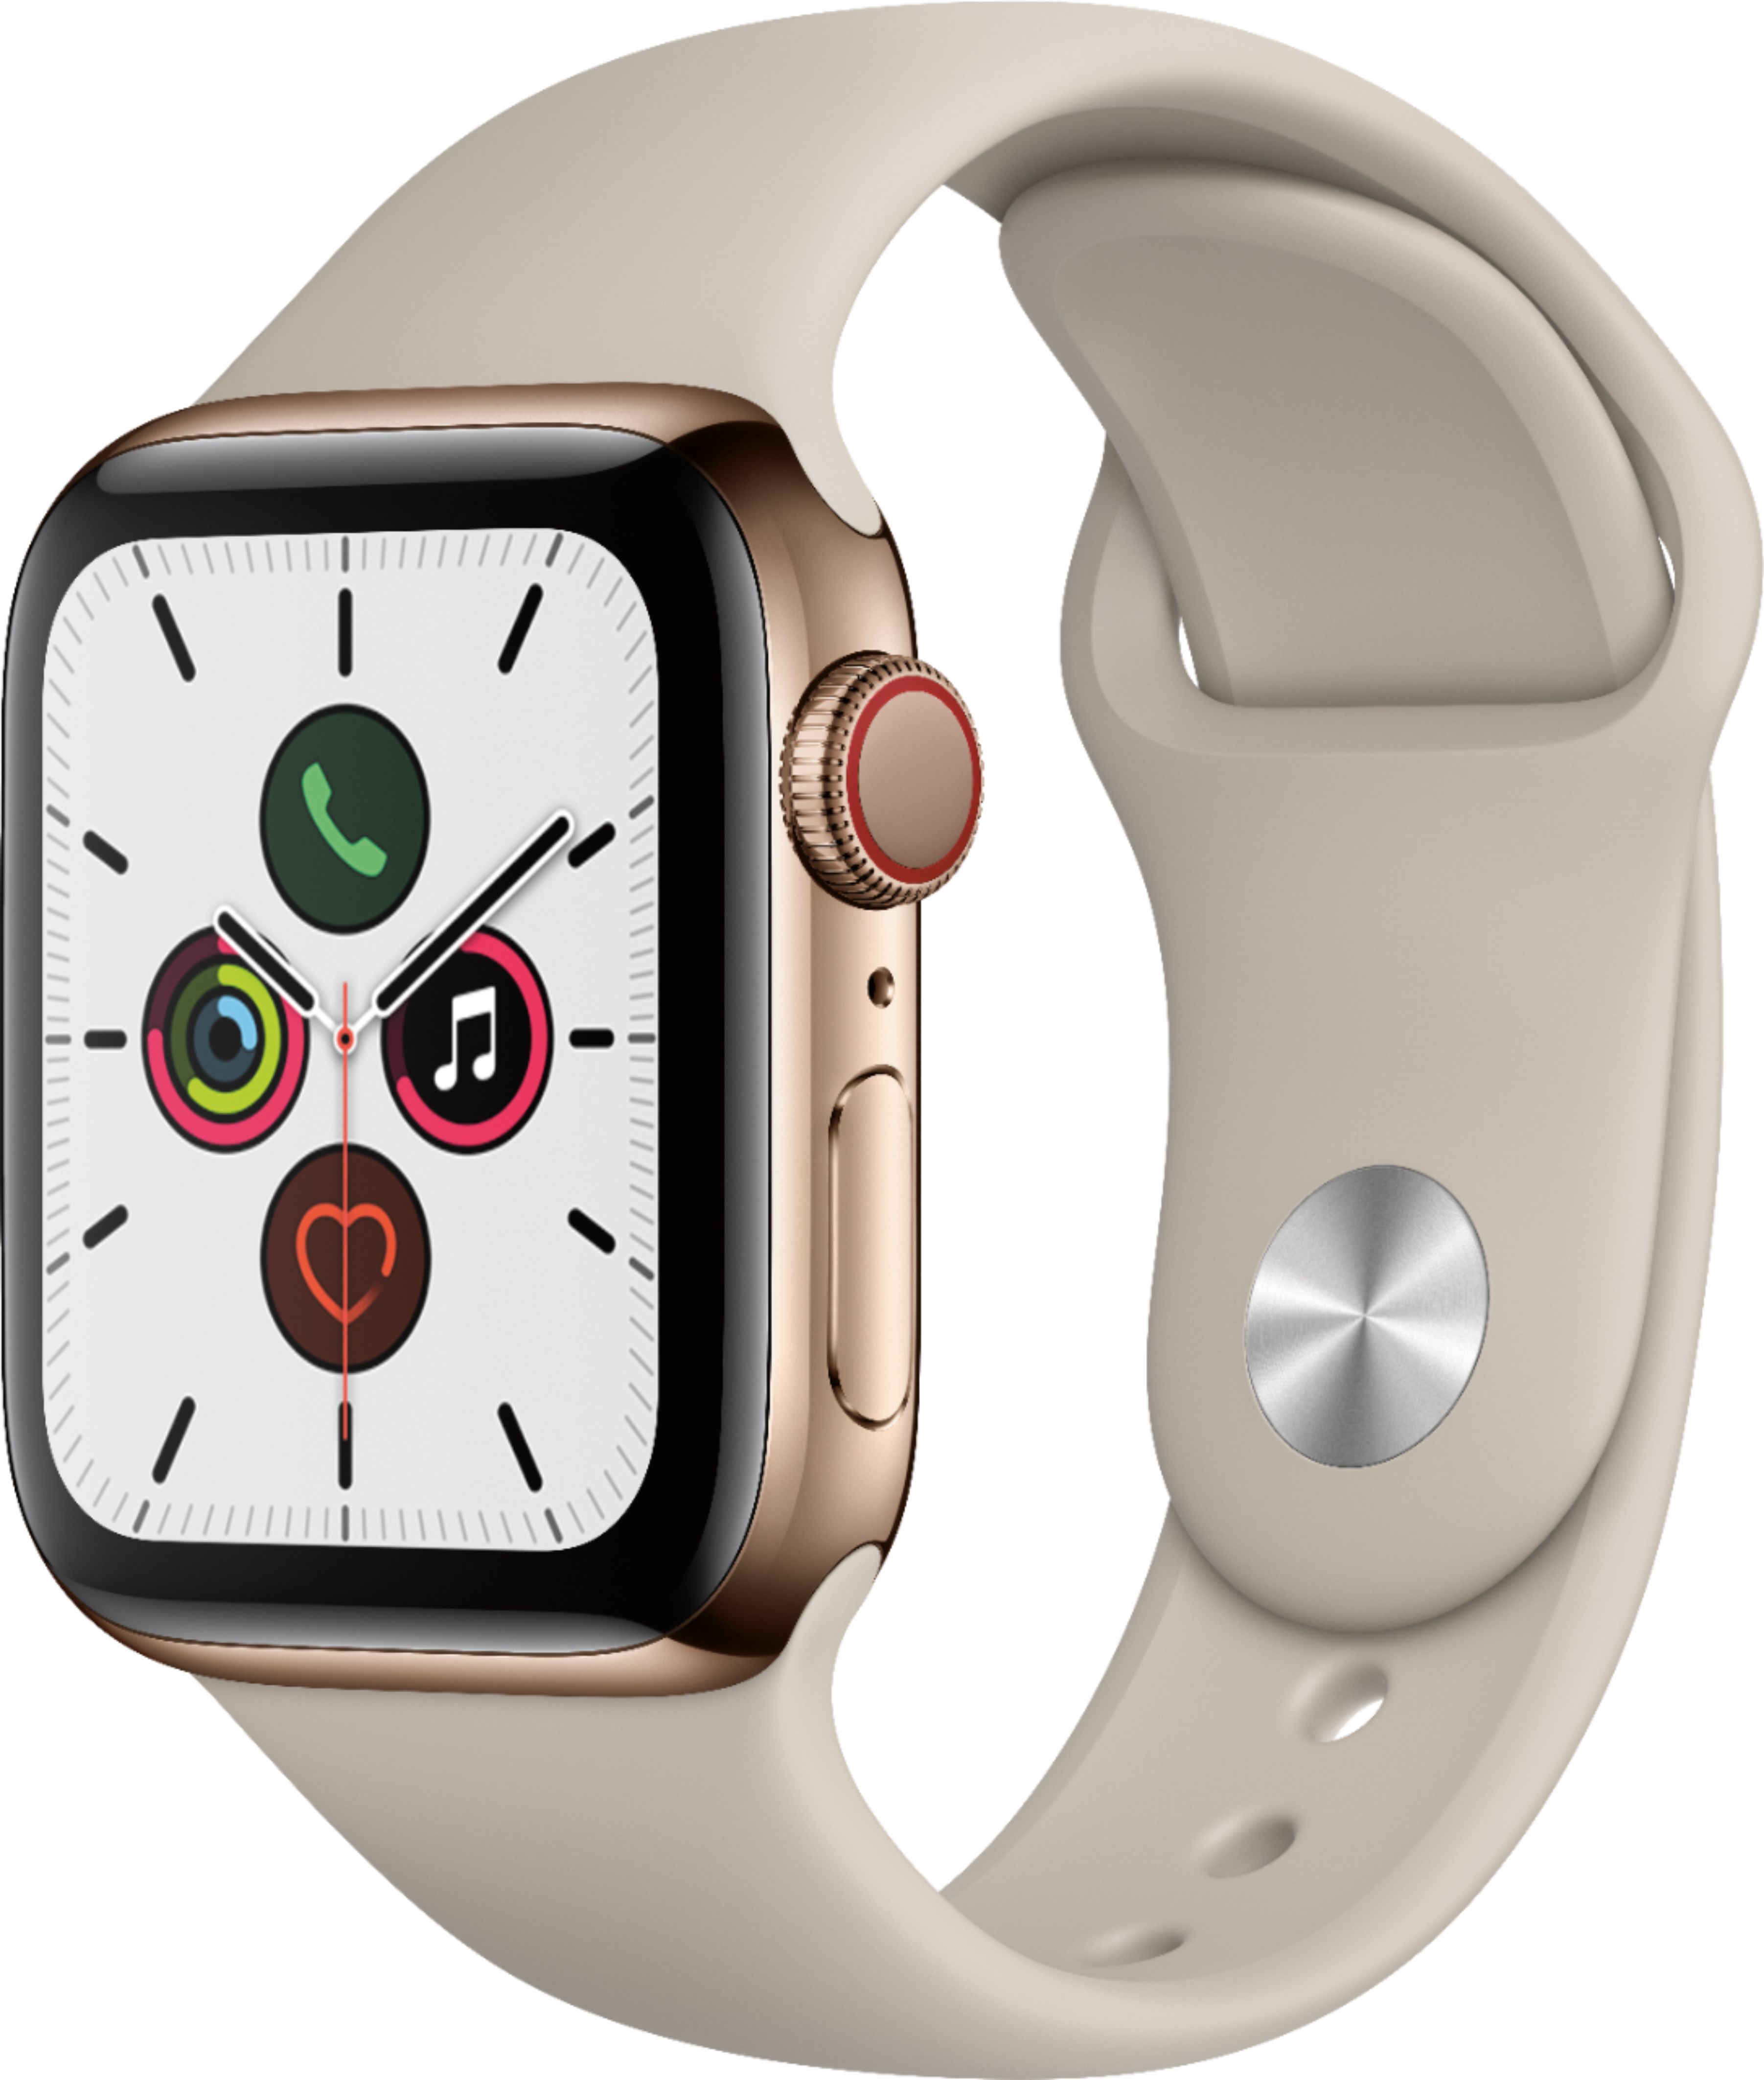 Apple Watch Series 5 (GPS + Cellular) 40mm Gold Stainless Steel Case with Stone Sport Band - Gold Stainless Steel